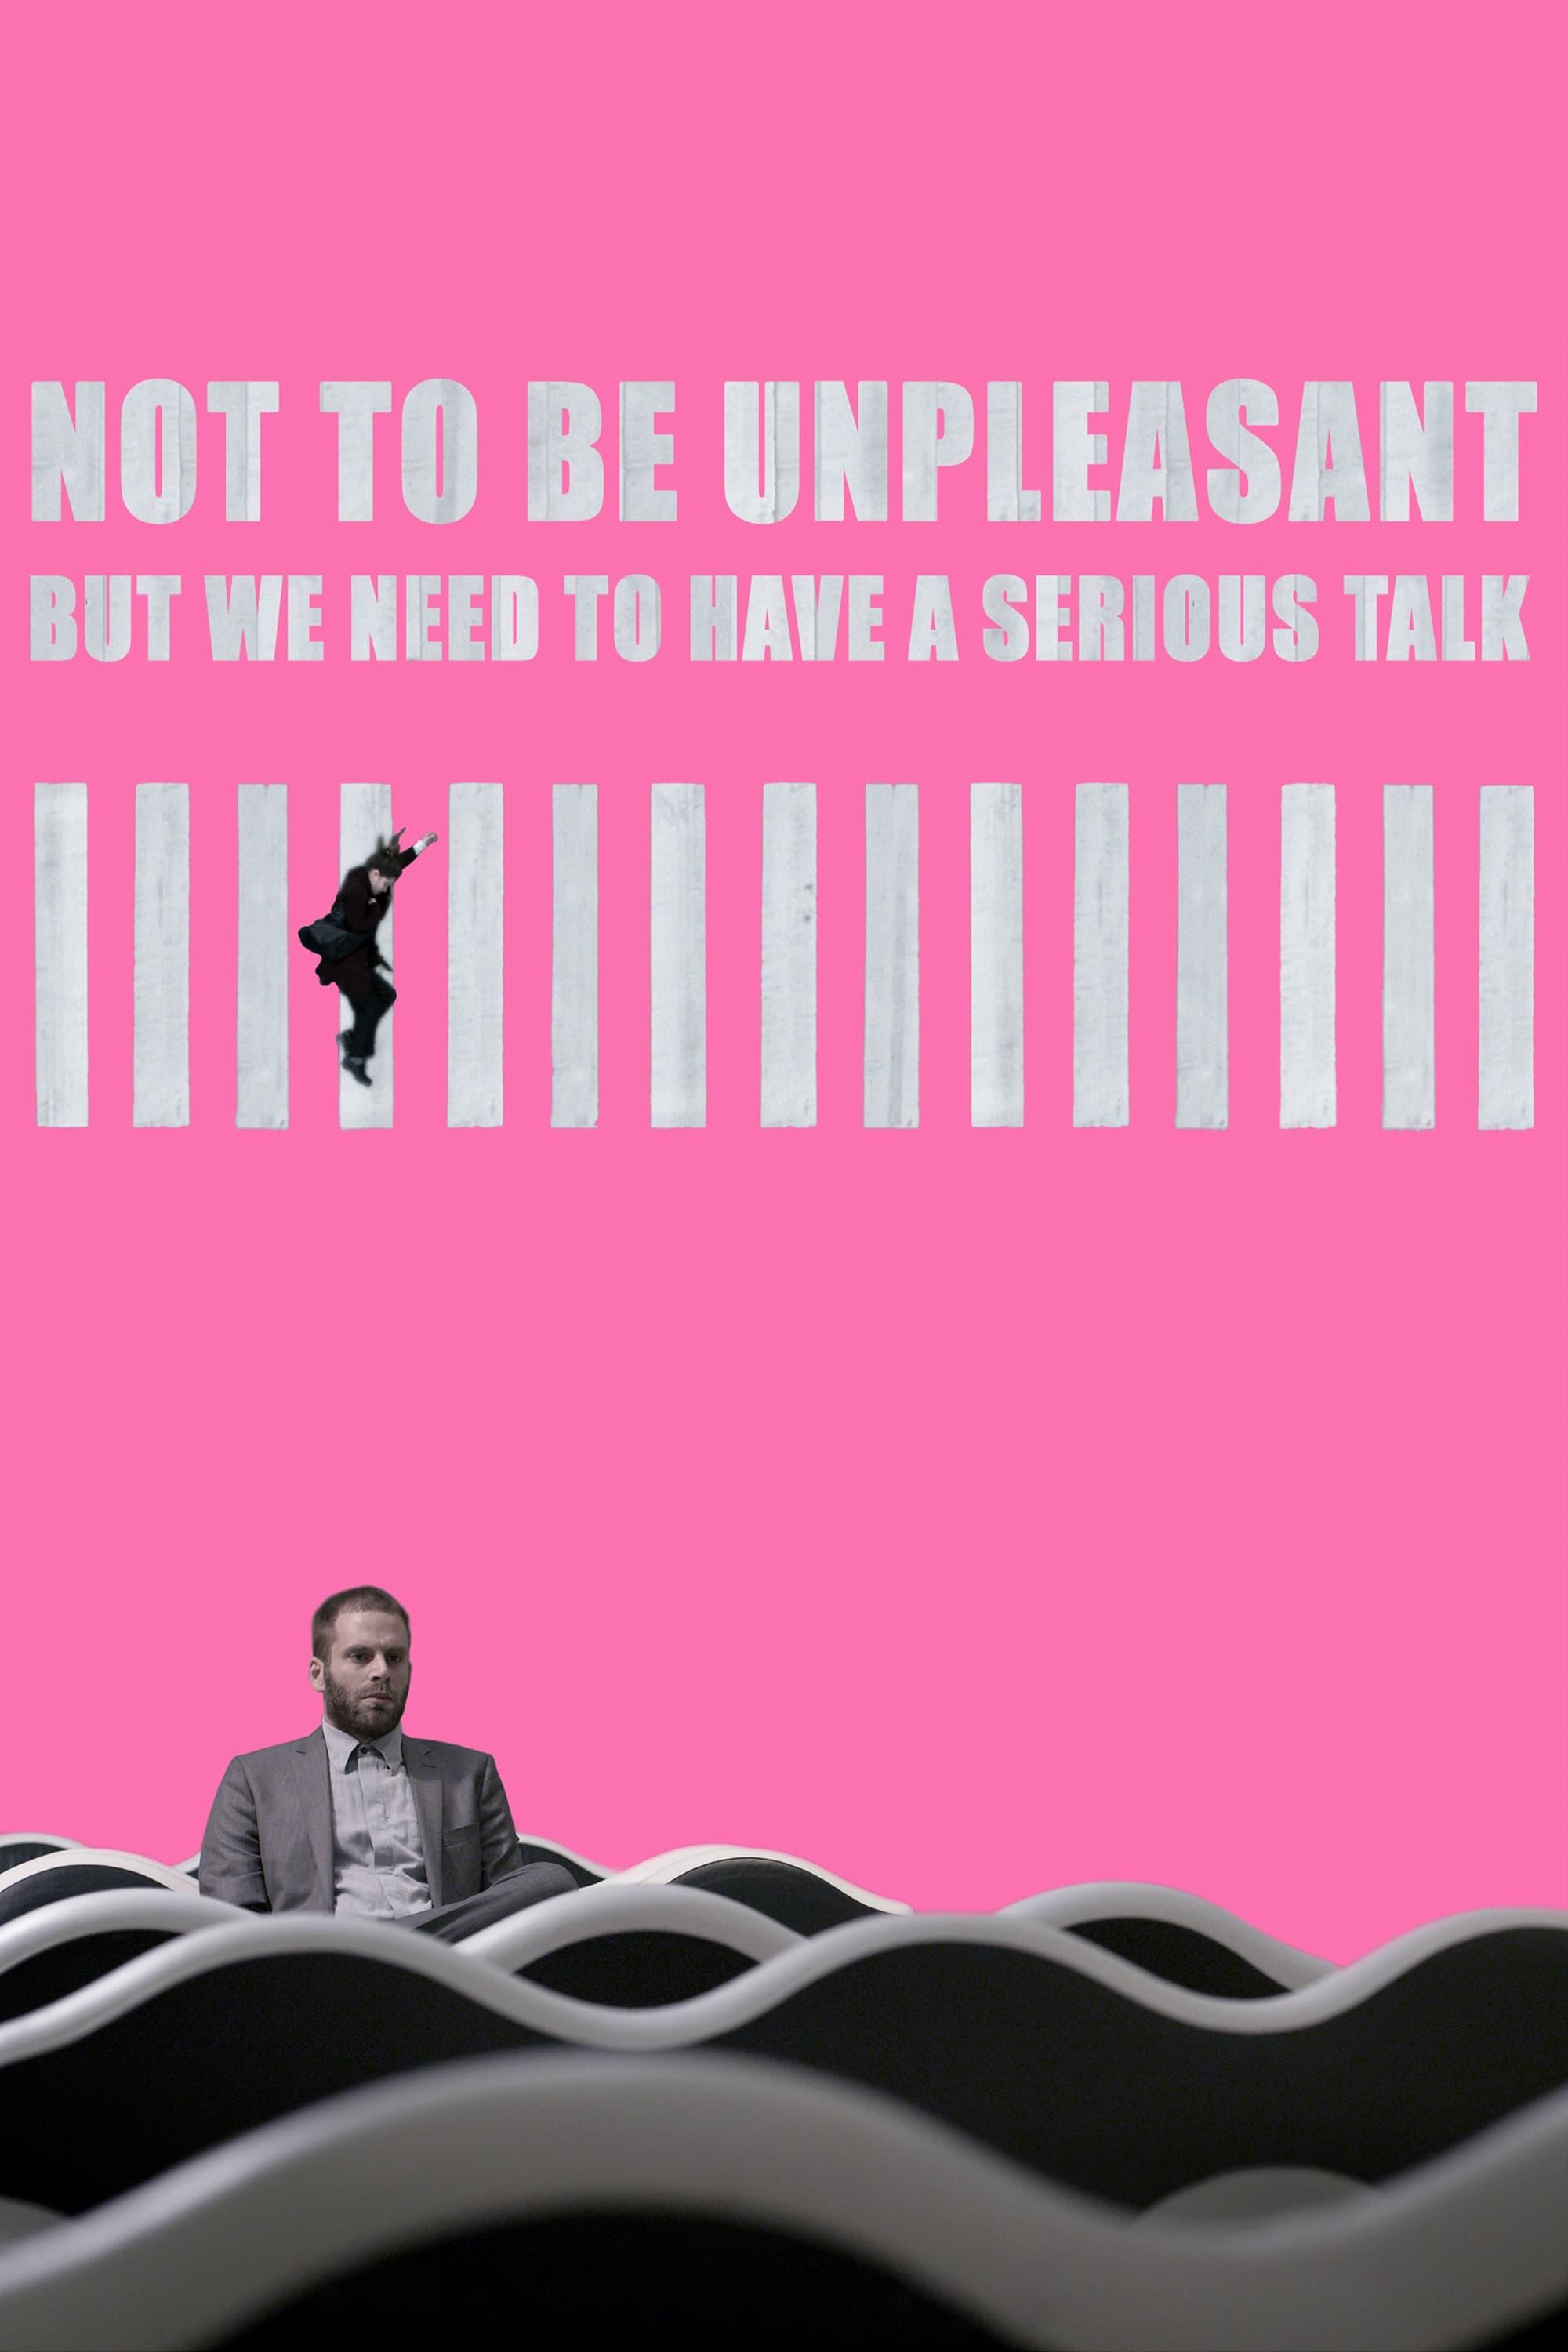 Not to Be Unpleasant But We Need To Have a Serious Talk poster